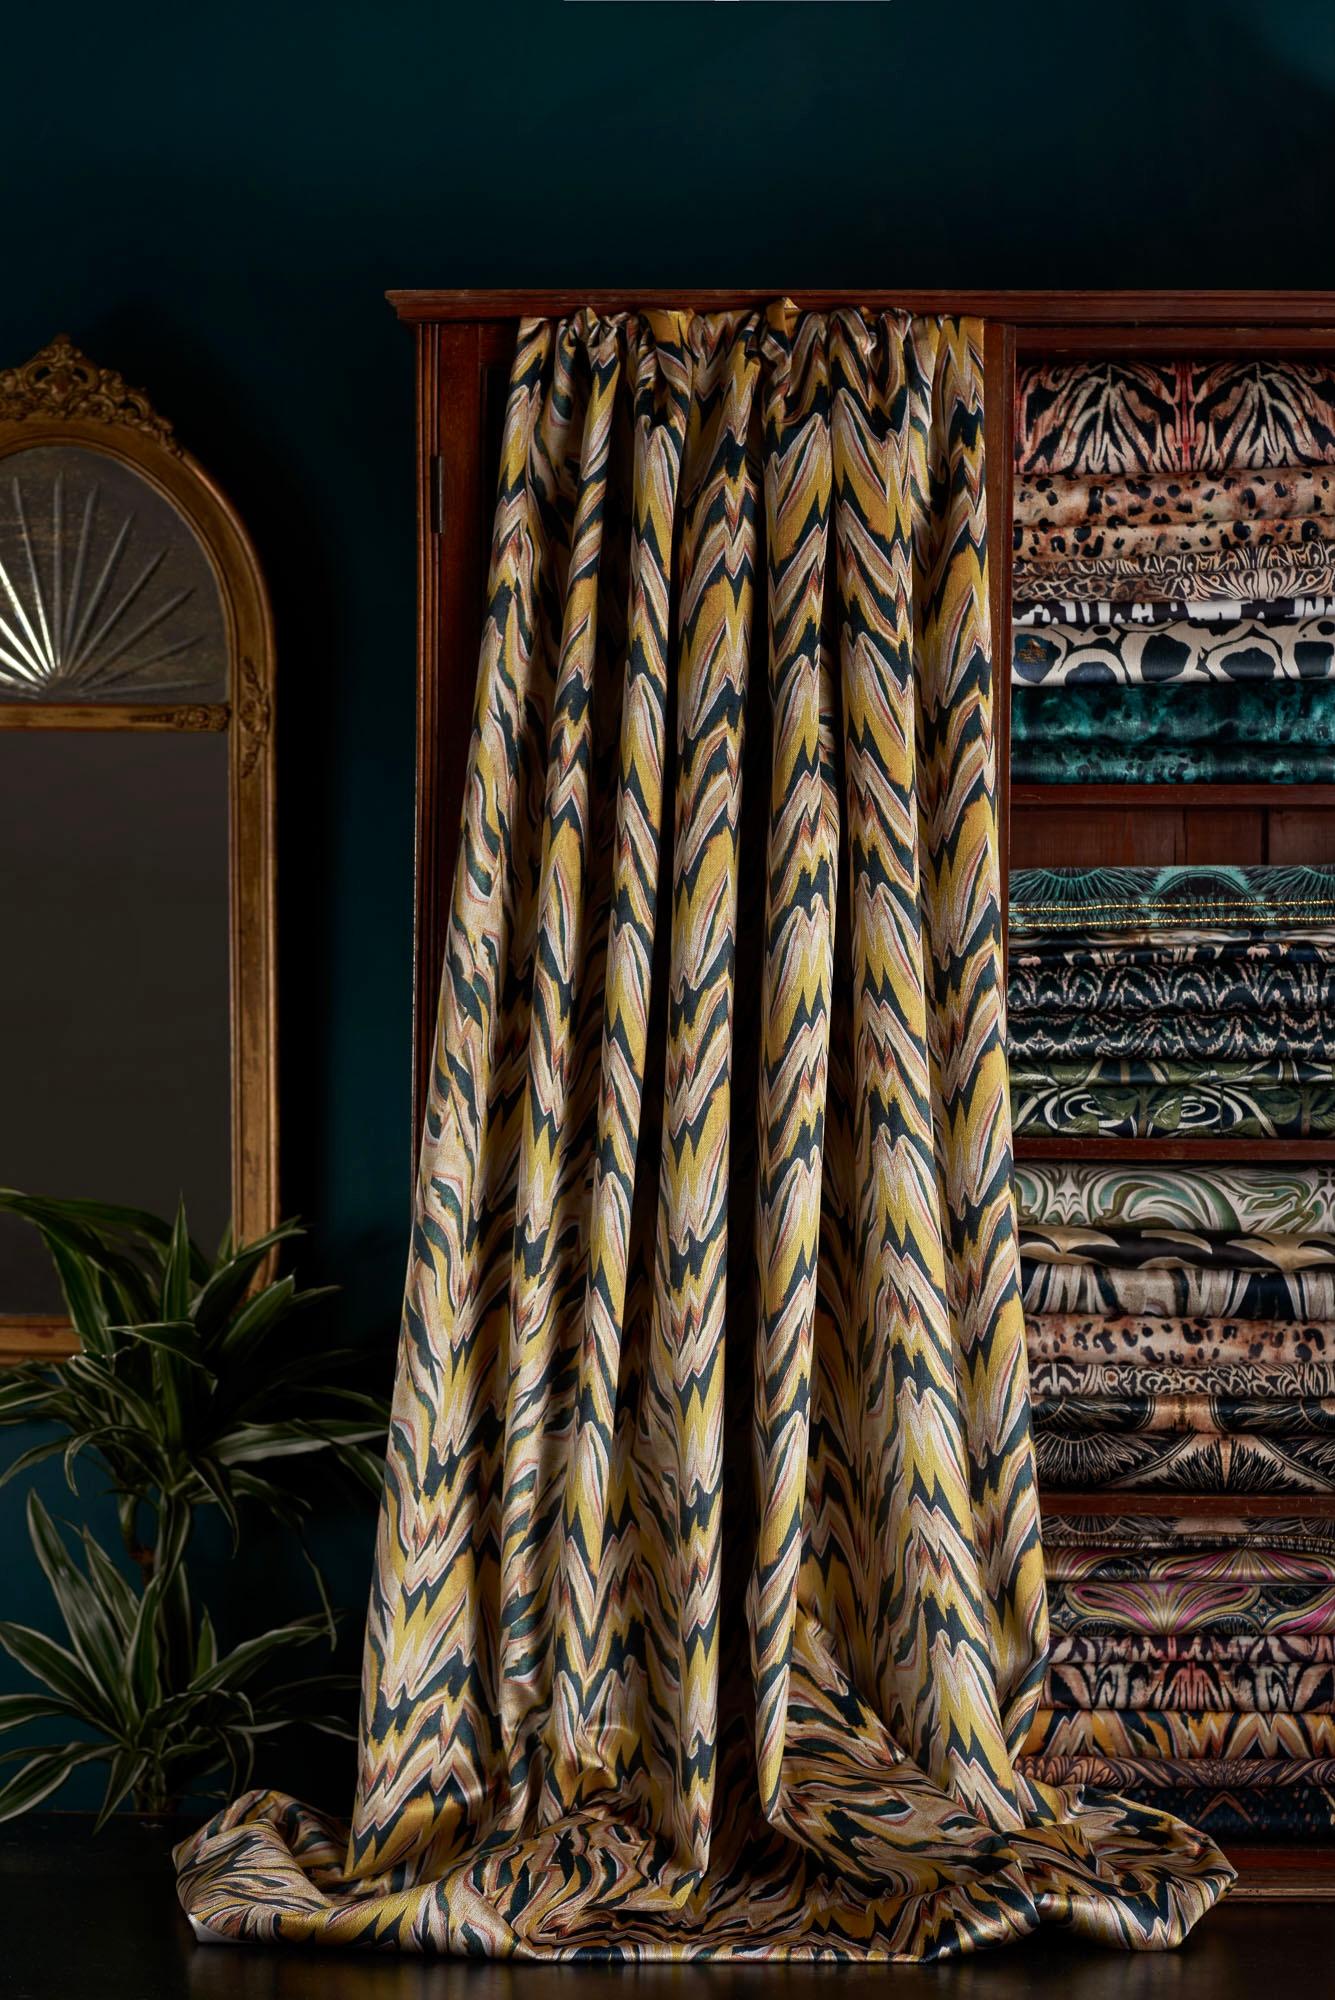 Our take on a tiger print – Makemba design available as fabric for your project. A bold and distinctive design in yellows orange teal and black.

This velvet is midweight, with a strong straight woven backing, so is suitable for upholstery, but is